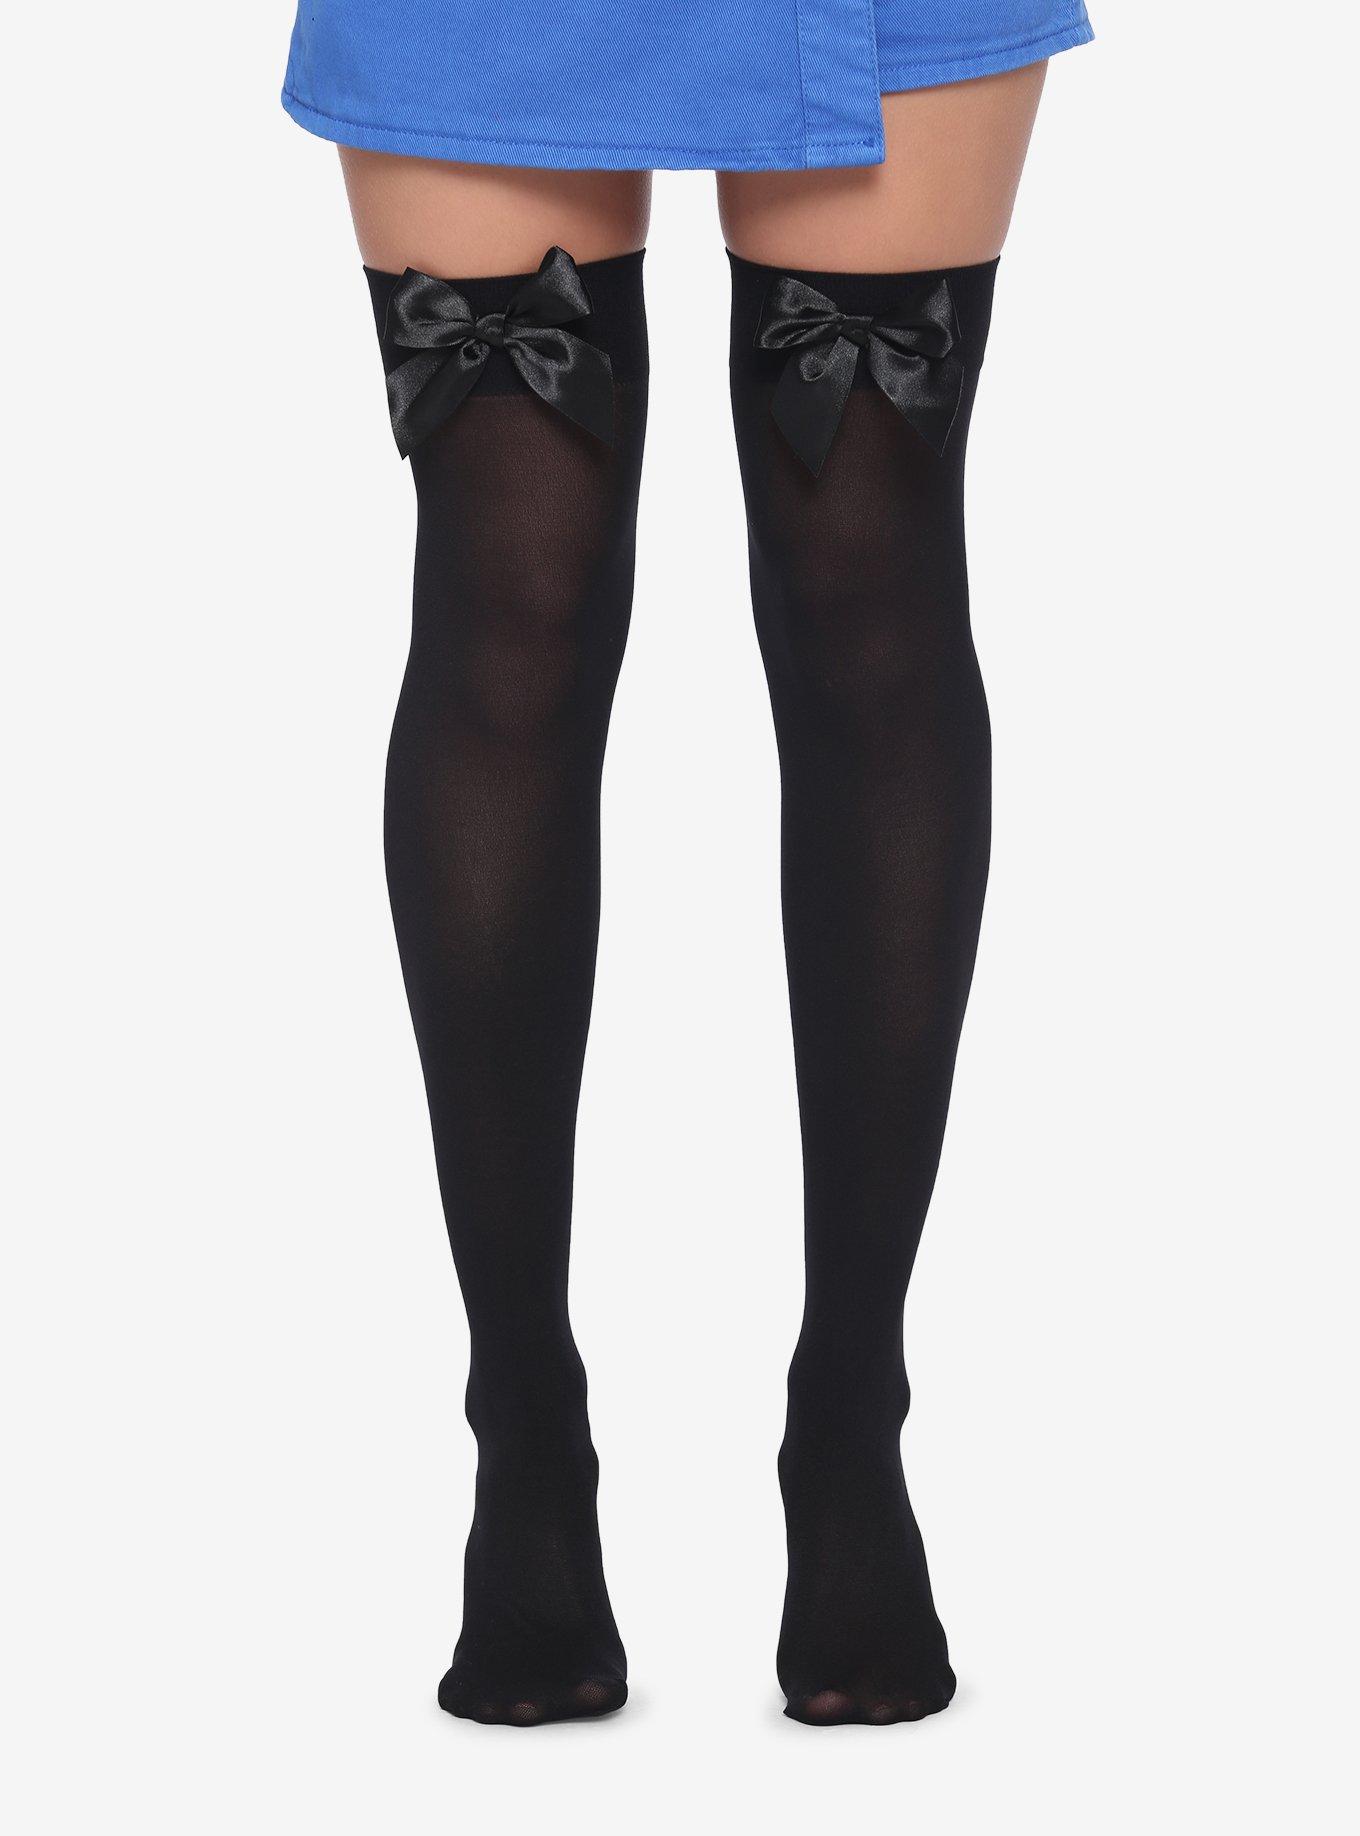 Black Thigh High Stockings with Black Bow